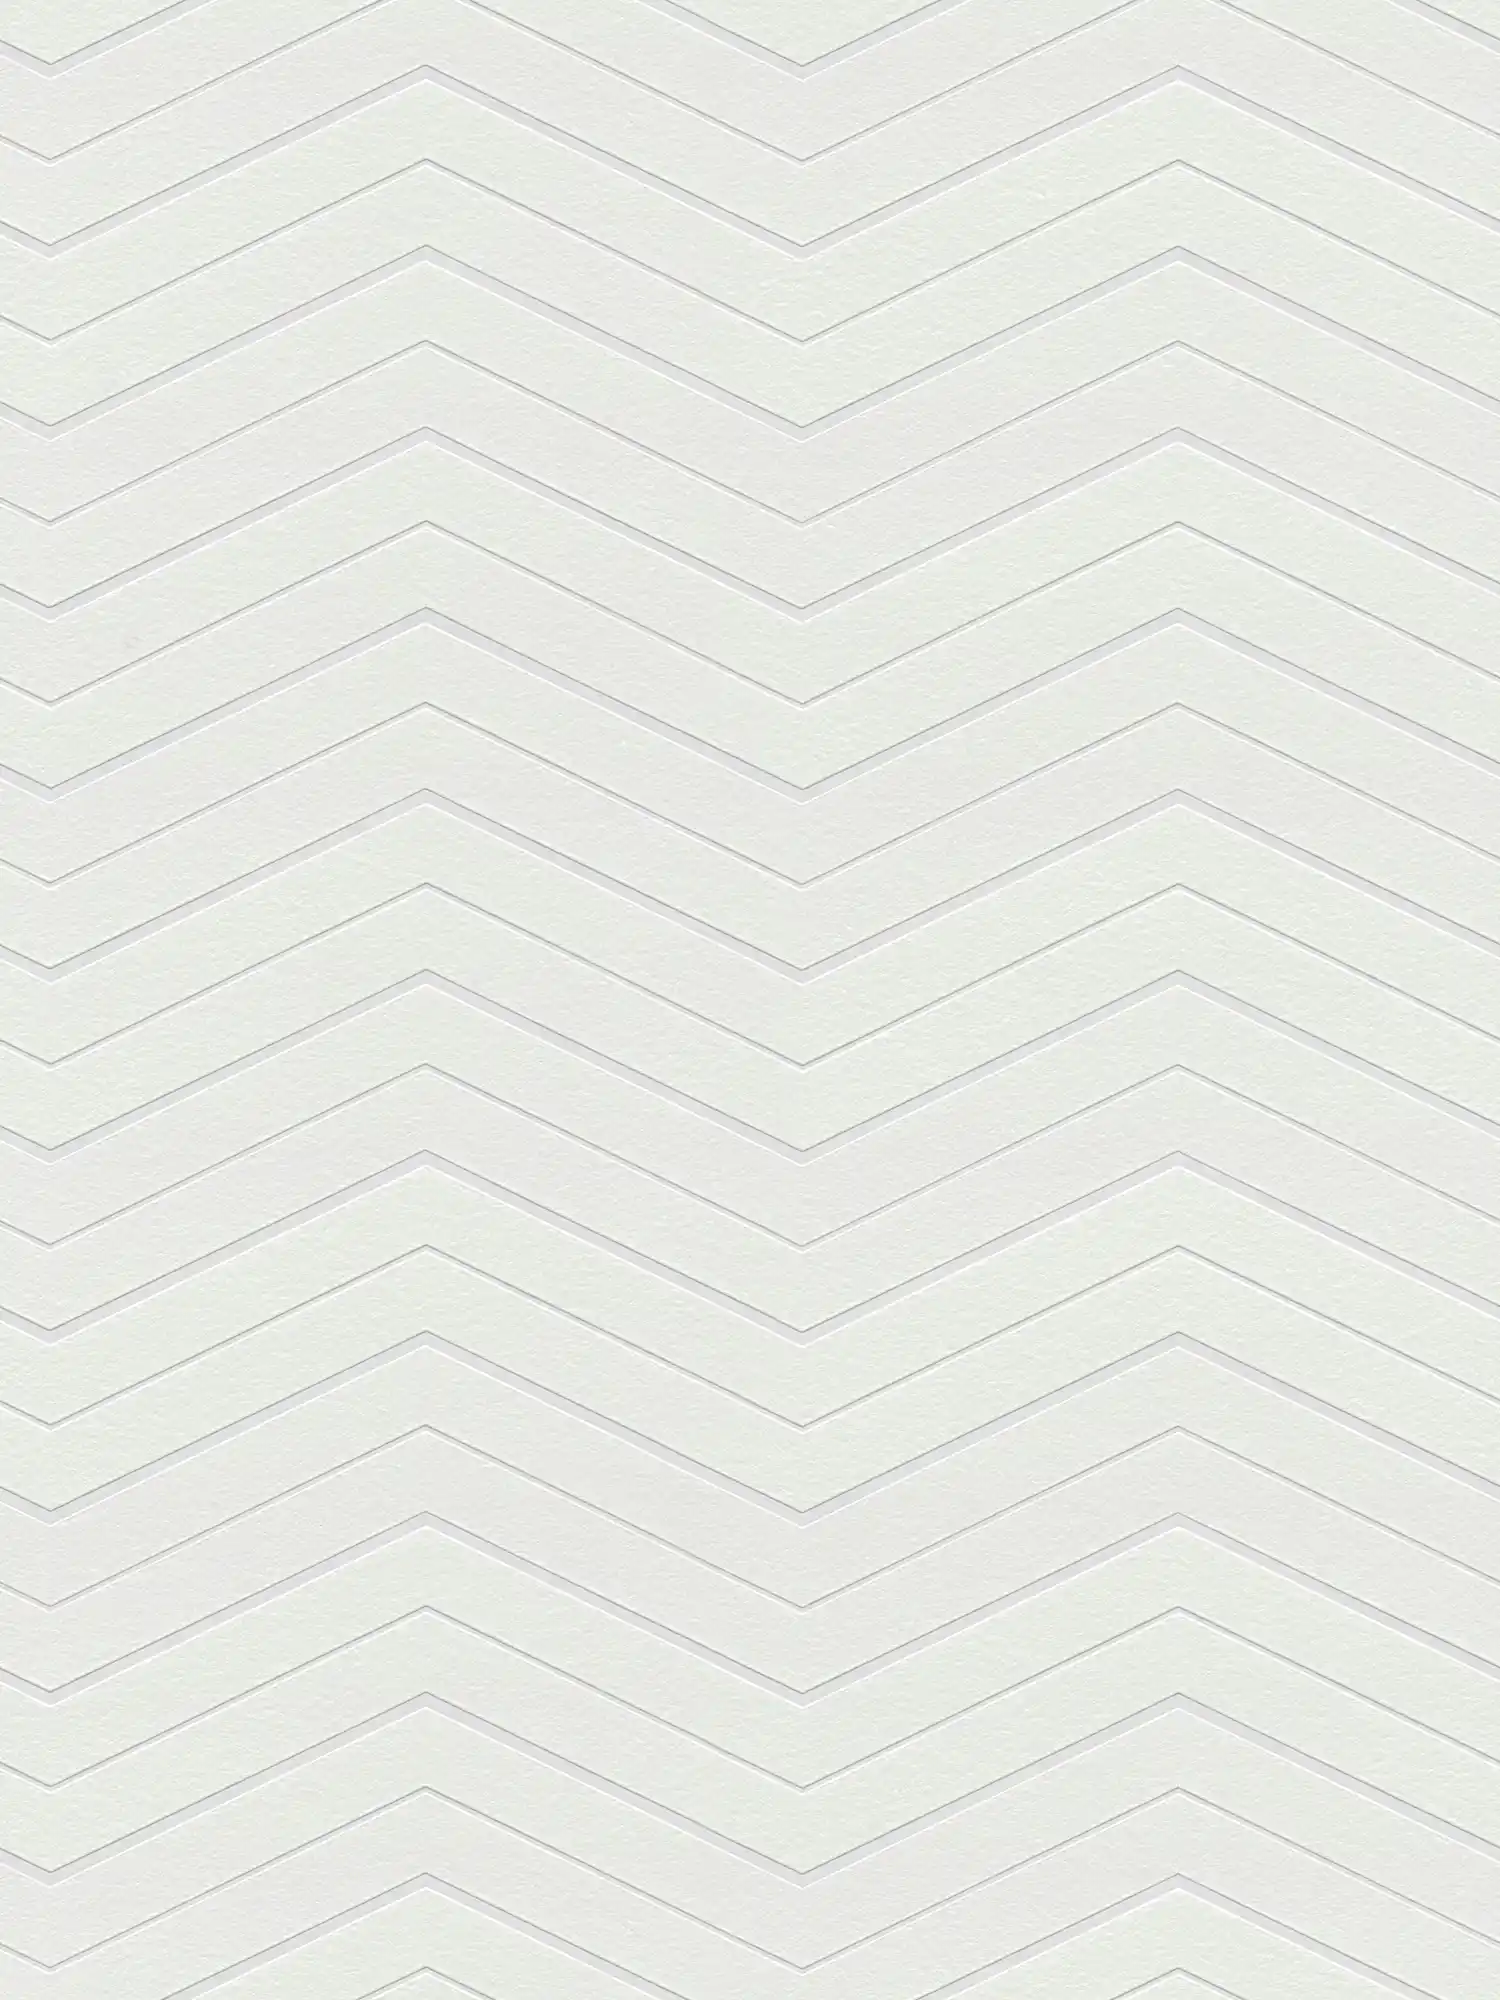 Graphic wallpaper with zigzag pattern to paint over - Paintable
